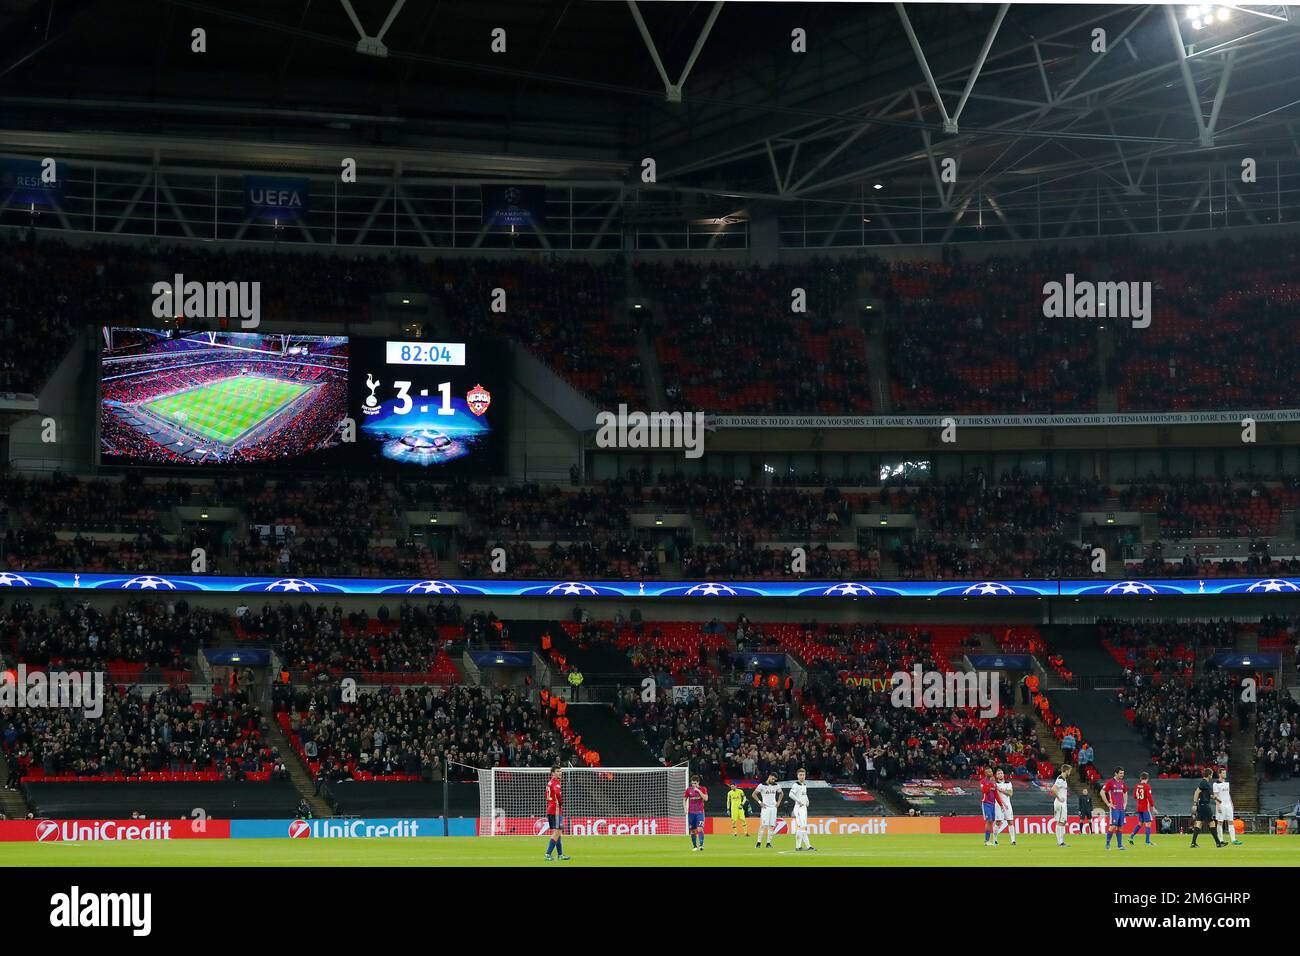 Wembley Stadium during the closing stages of the match - Tottenham Hotspur v CSKA Moscow, UEFA Champions League, Wembley Stadium, London - 7th December 2016. Stock Photo